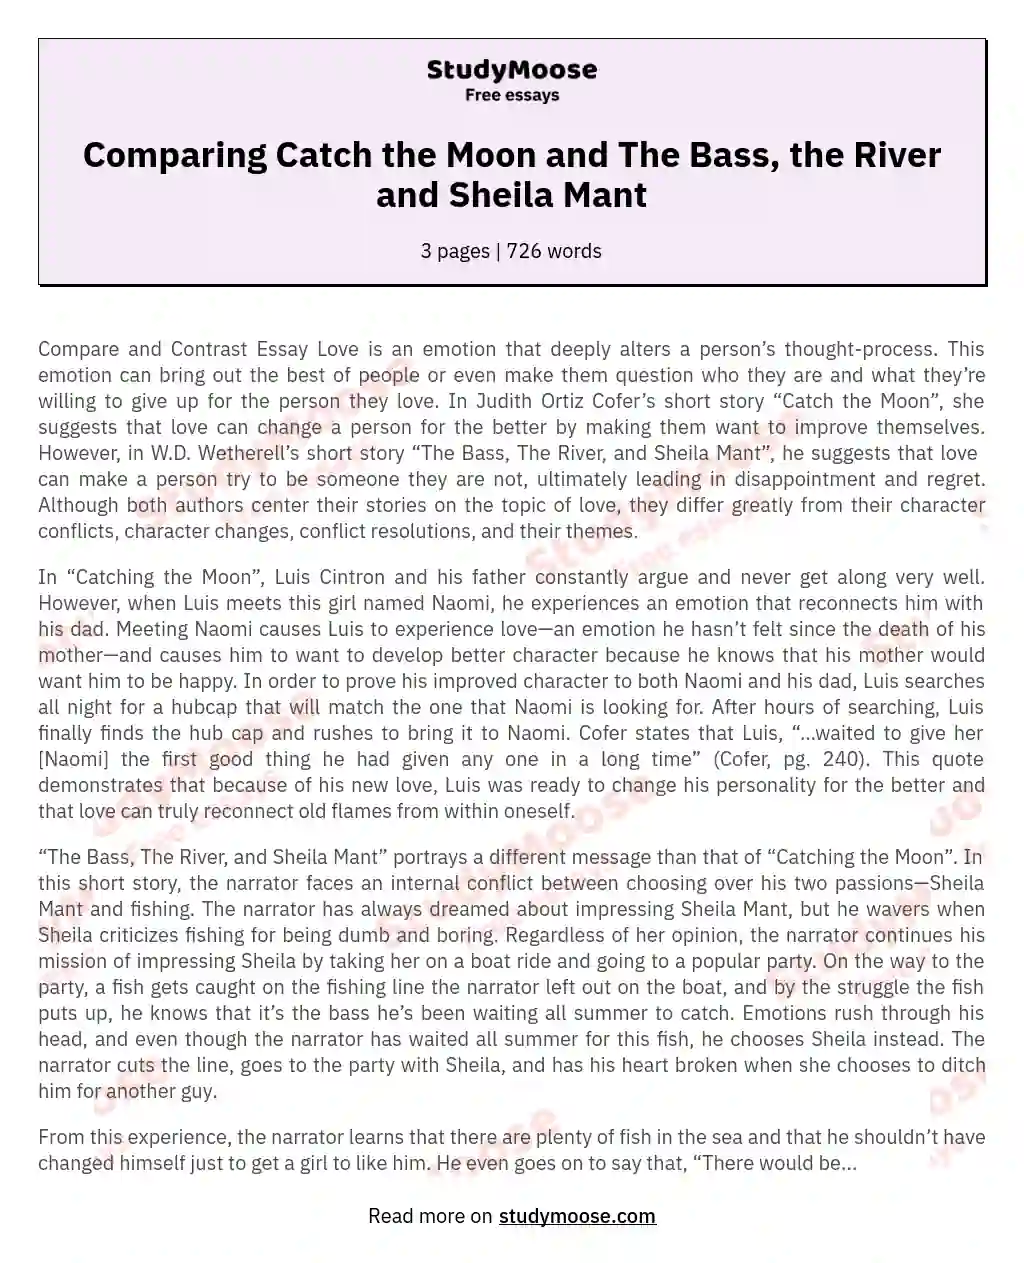 Comparing Catch the Moon and The Bass, the River and Sheila Mant essay